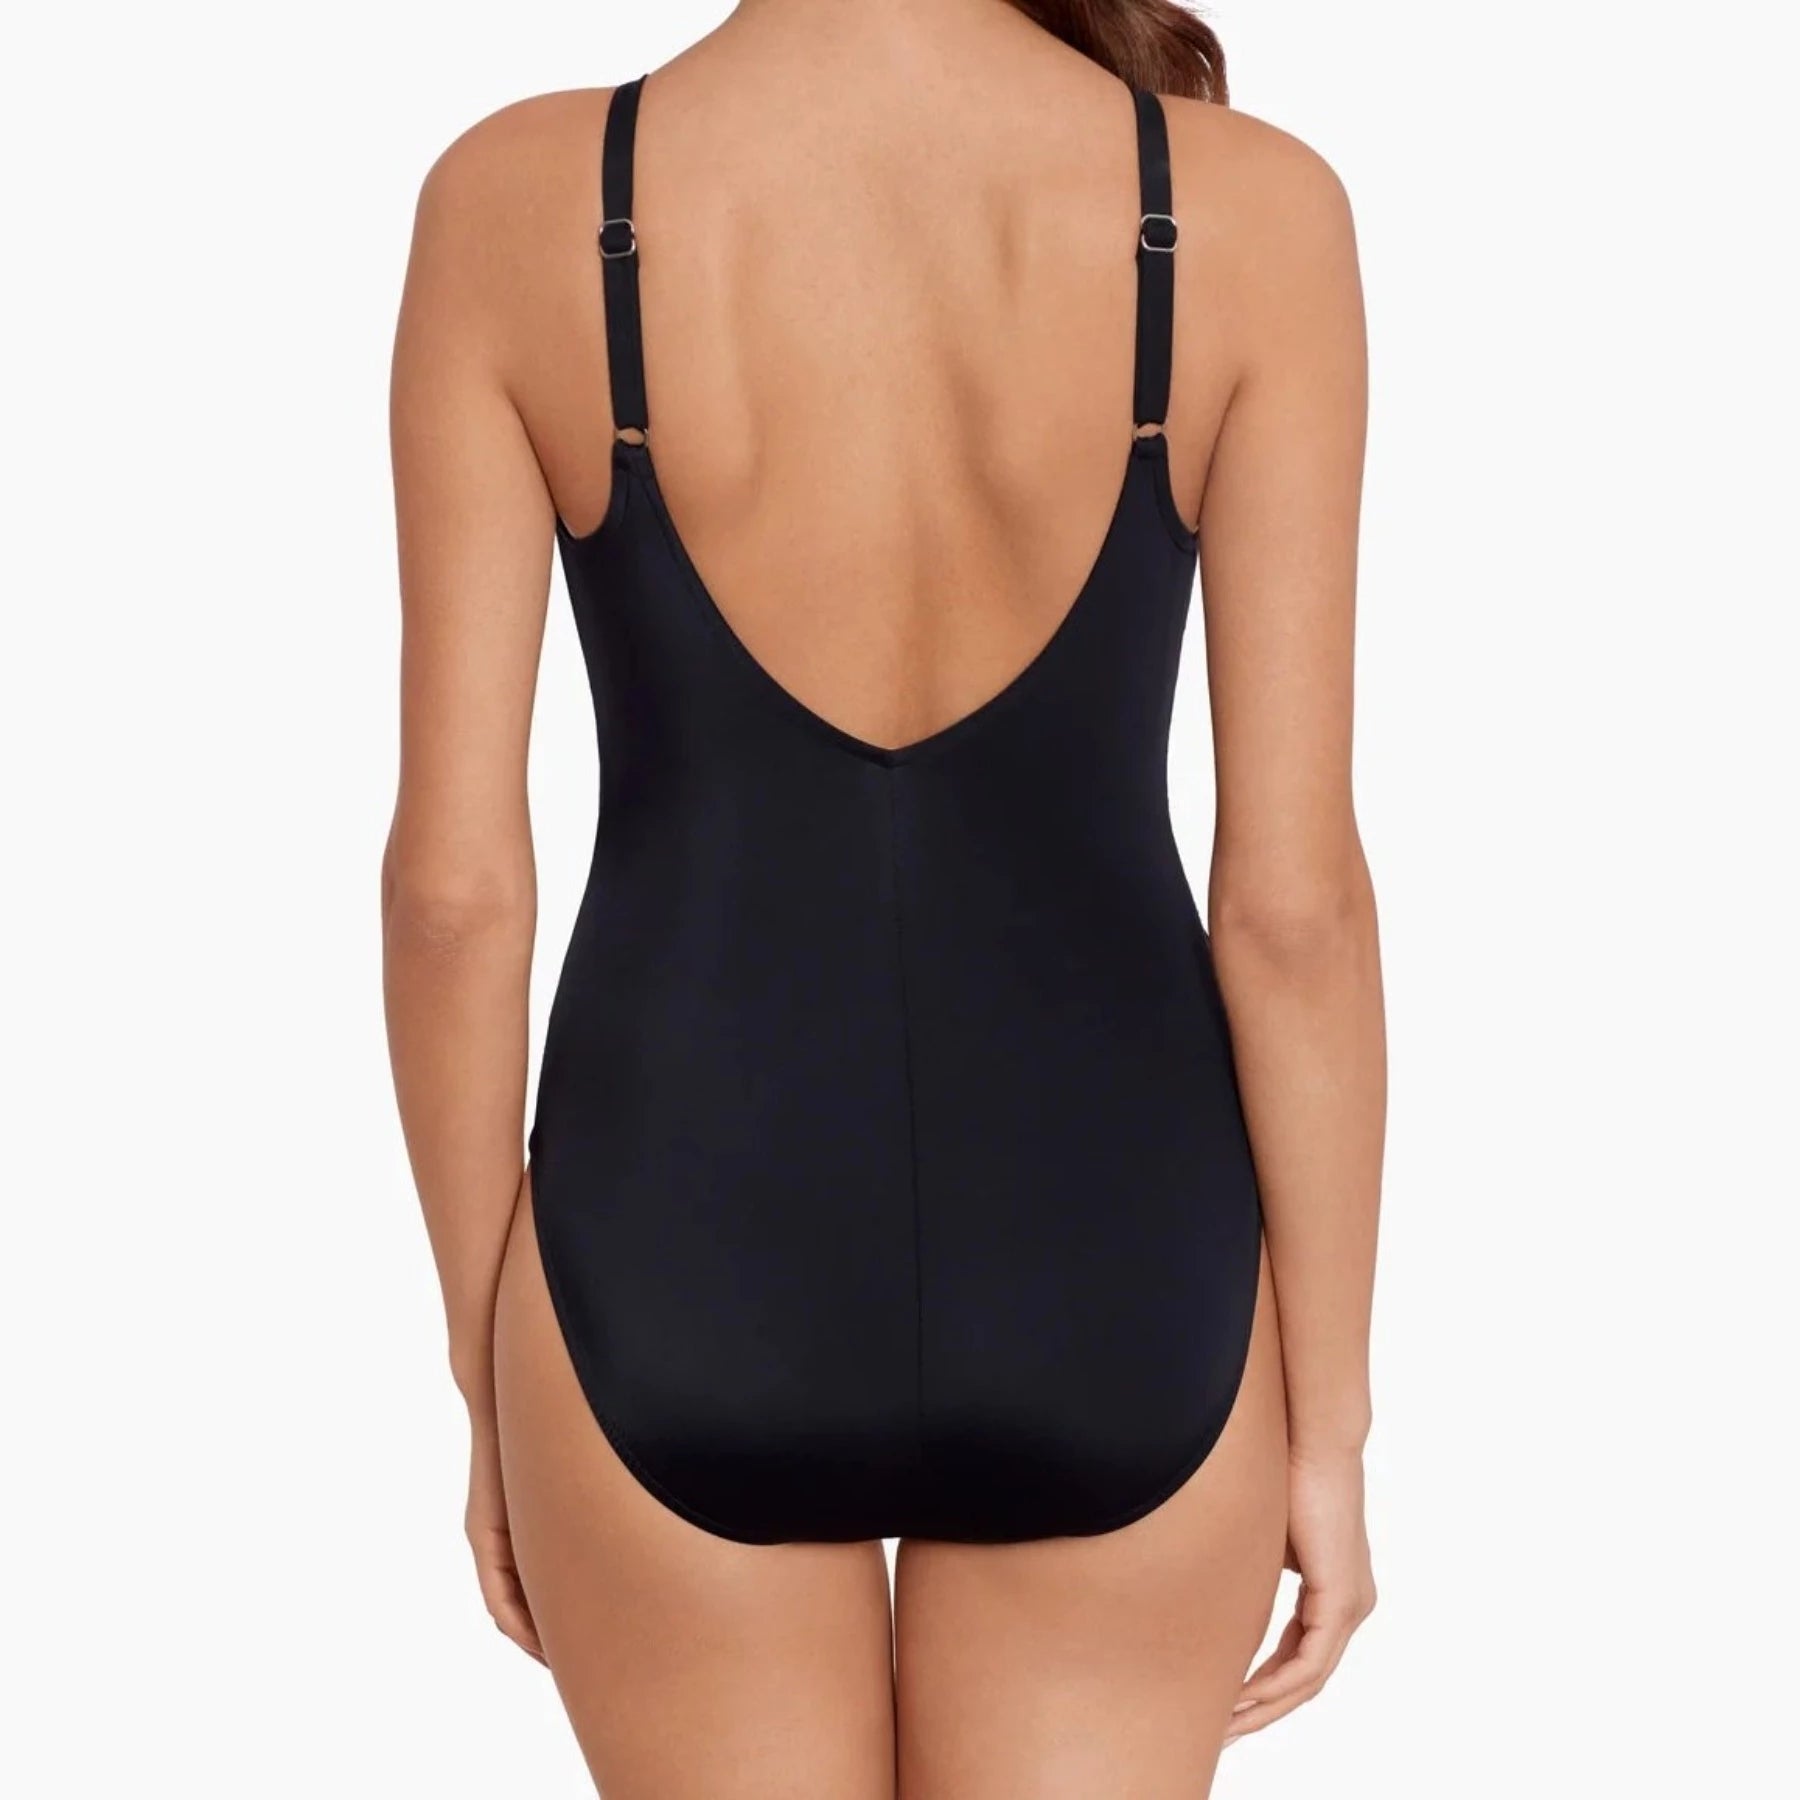 Riveted Diana One Piece Swimsuit 6017510 - Black